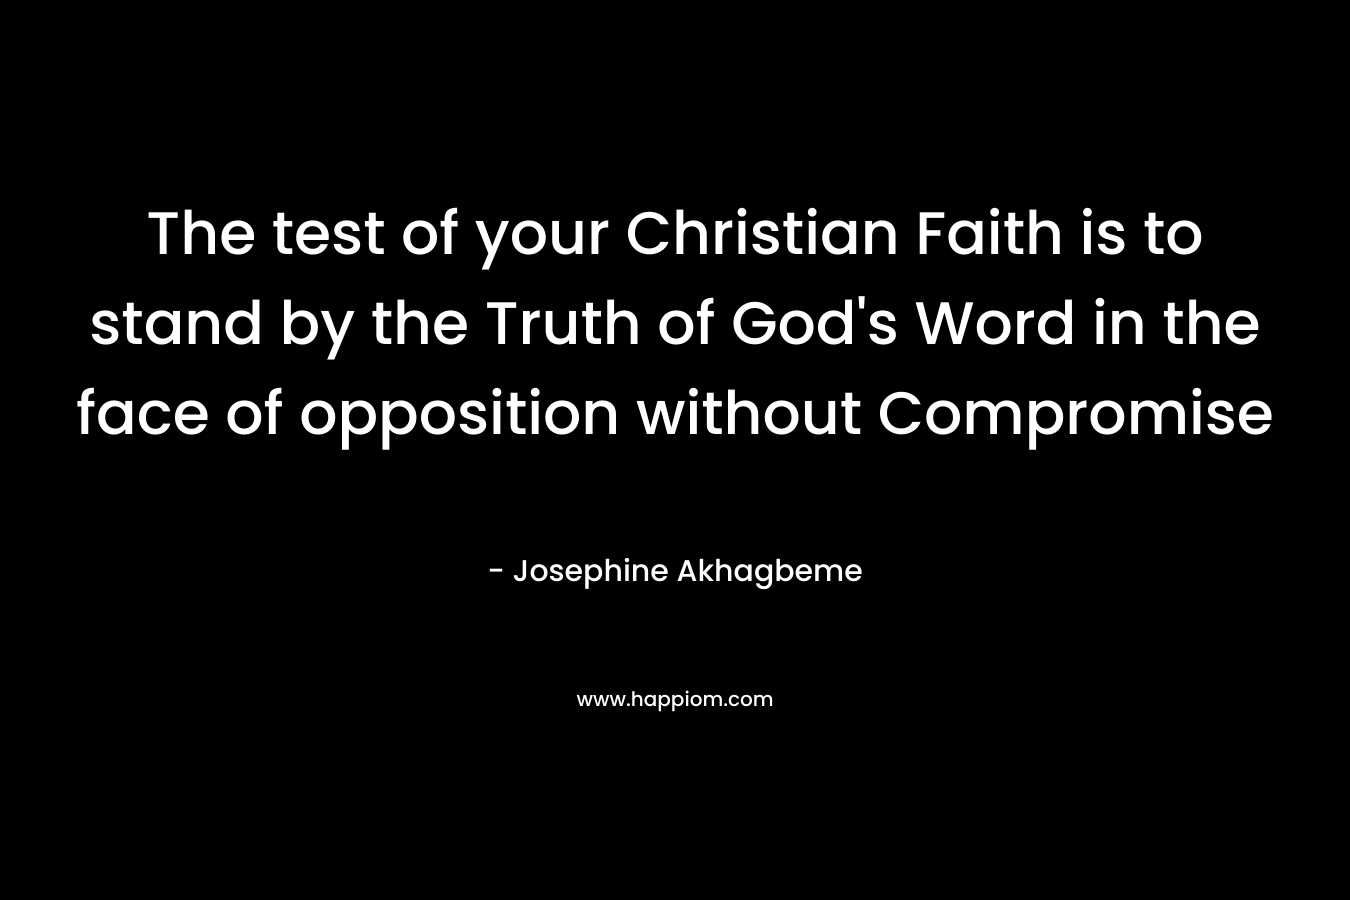 The test of your Christian Faith is to stand by the Truth of God’s Word in the face of opposition without Compromise – Josephine Akhagbeme